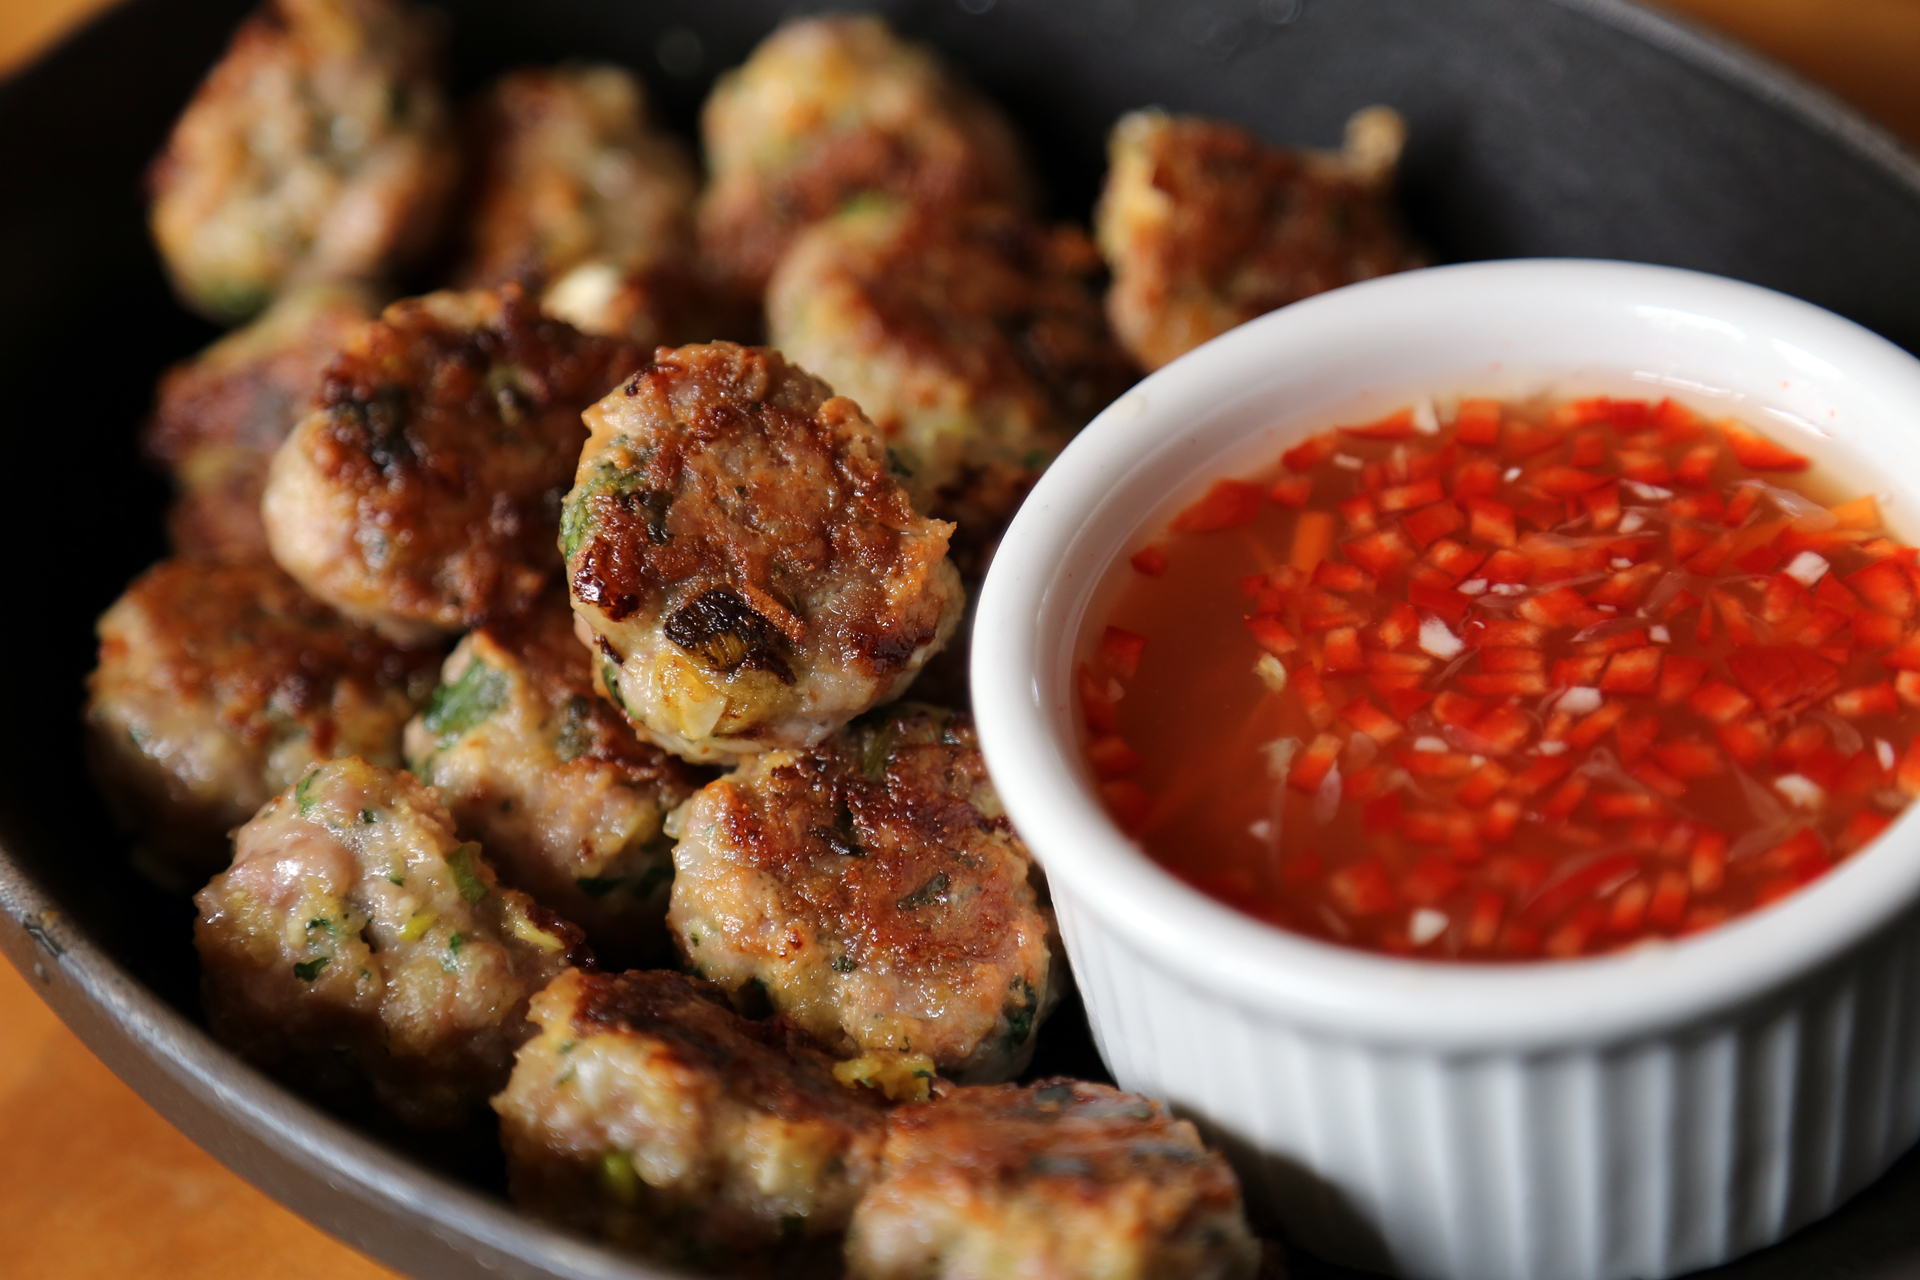 Vietnamese Pork Meatballs with Sweet-Tangy Garlic Dipping Sauce